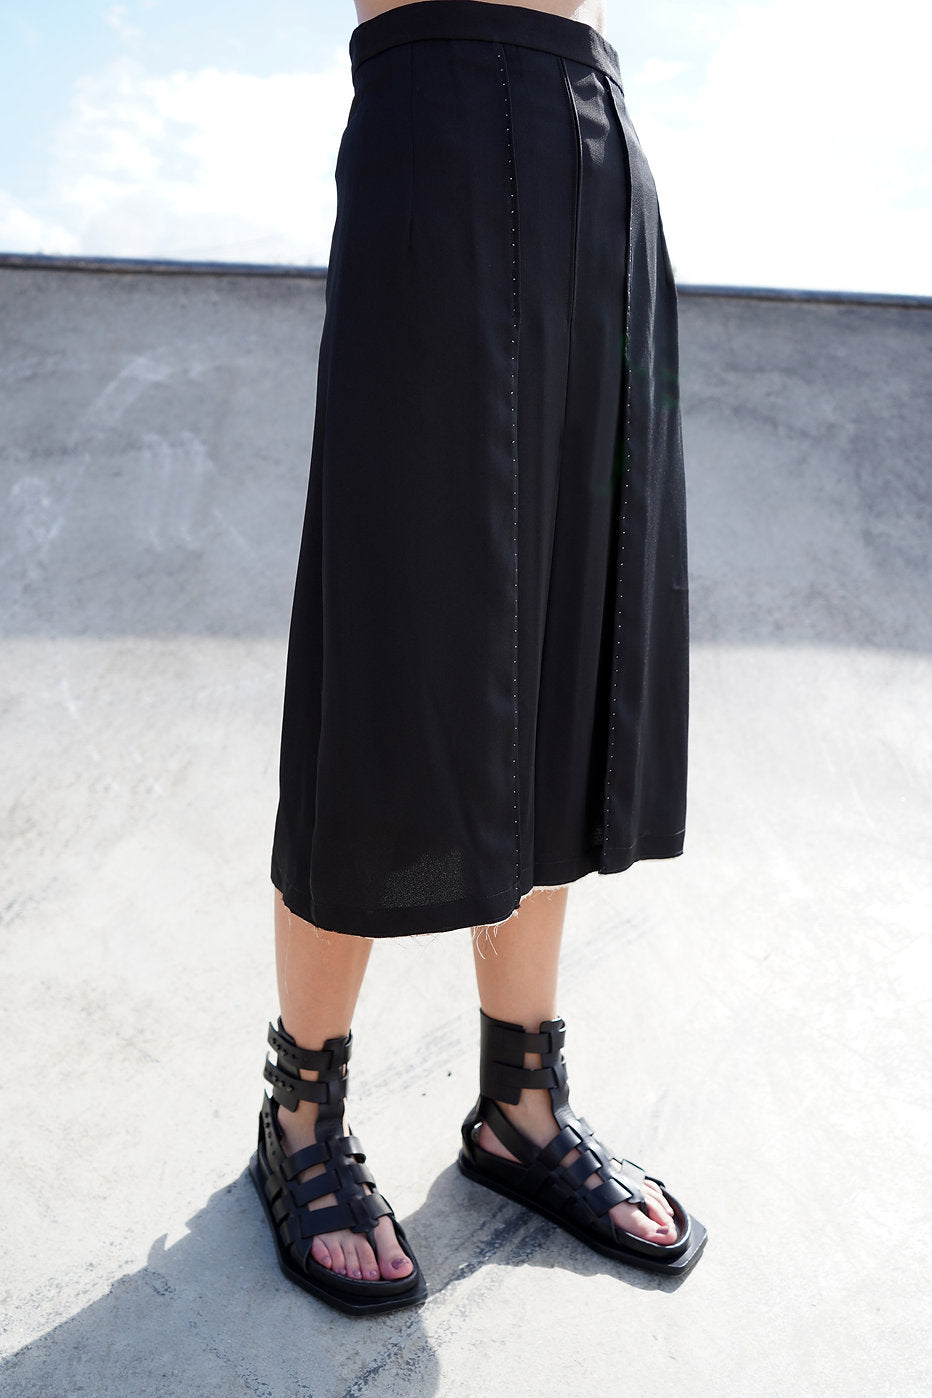 Detailed view of the raw hem and contrast binding on the black Amelia Midi Skirt.